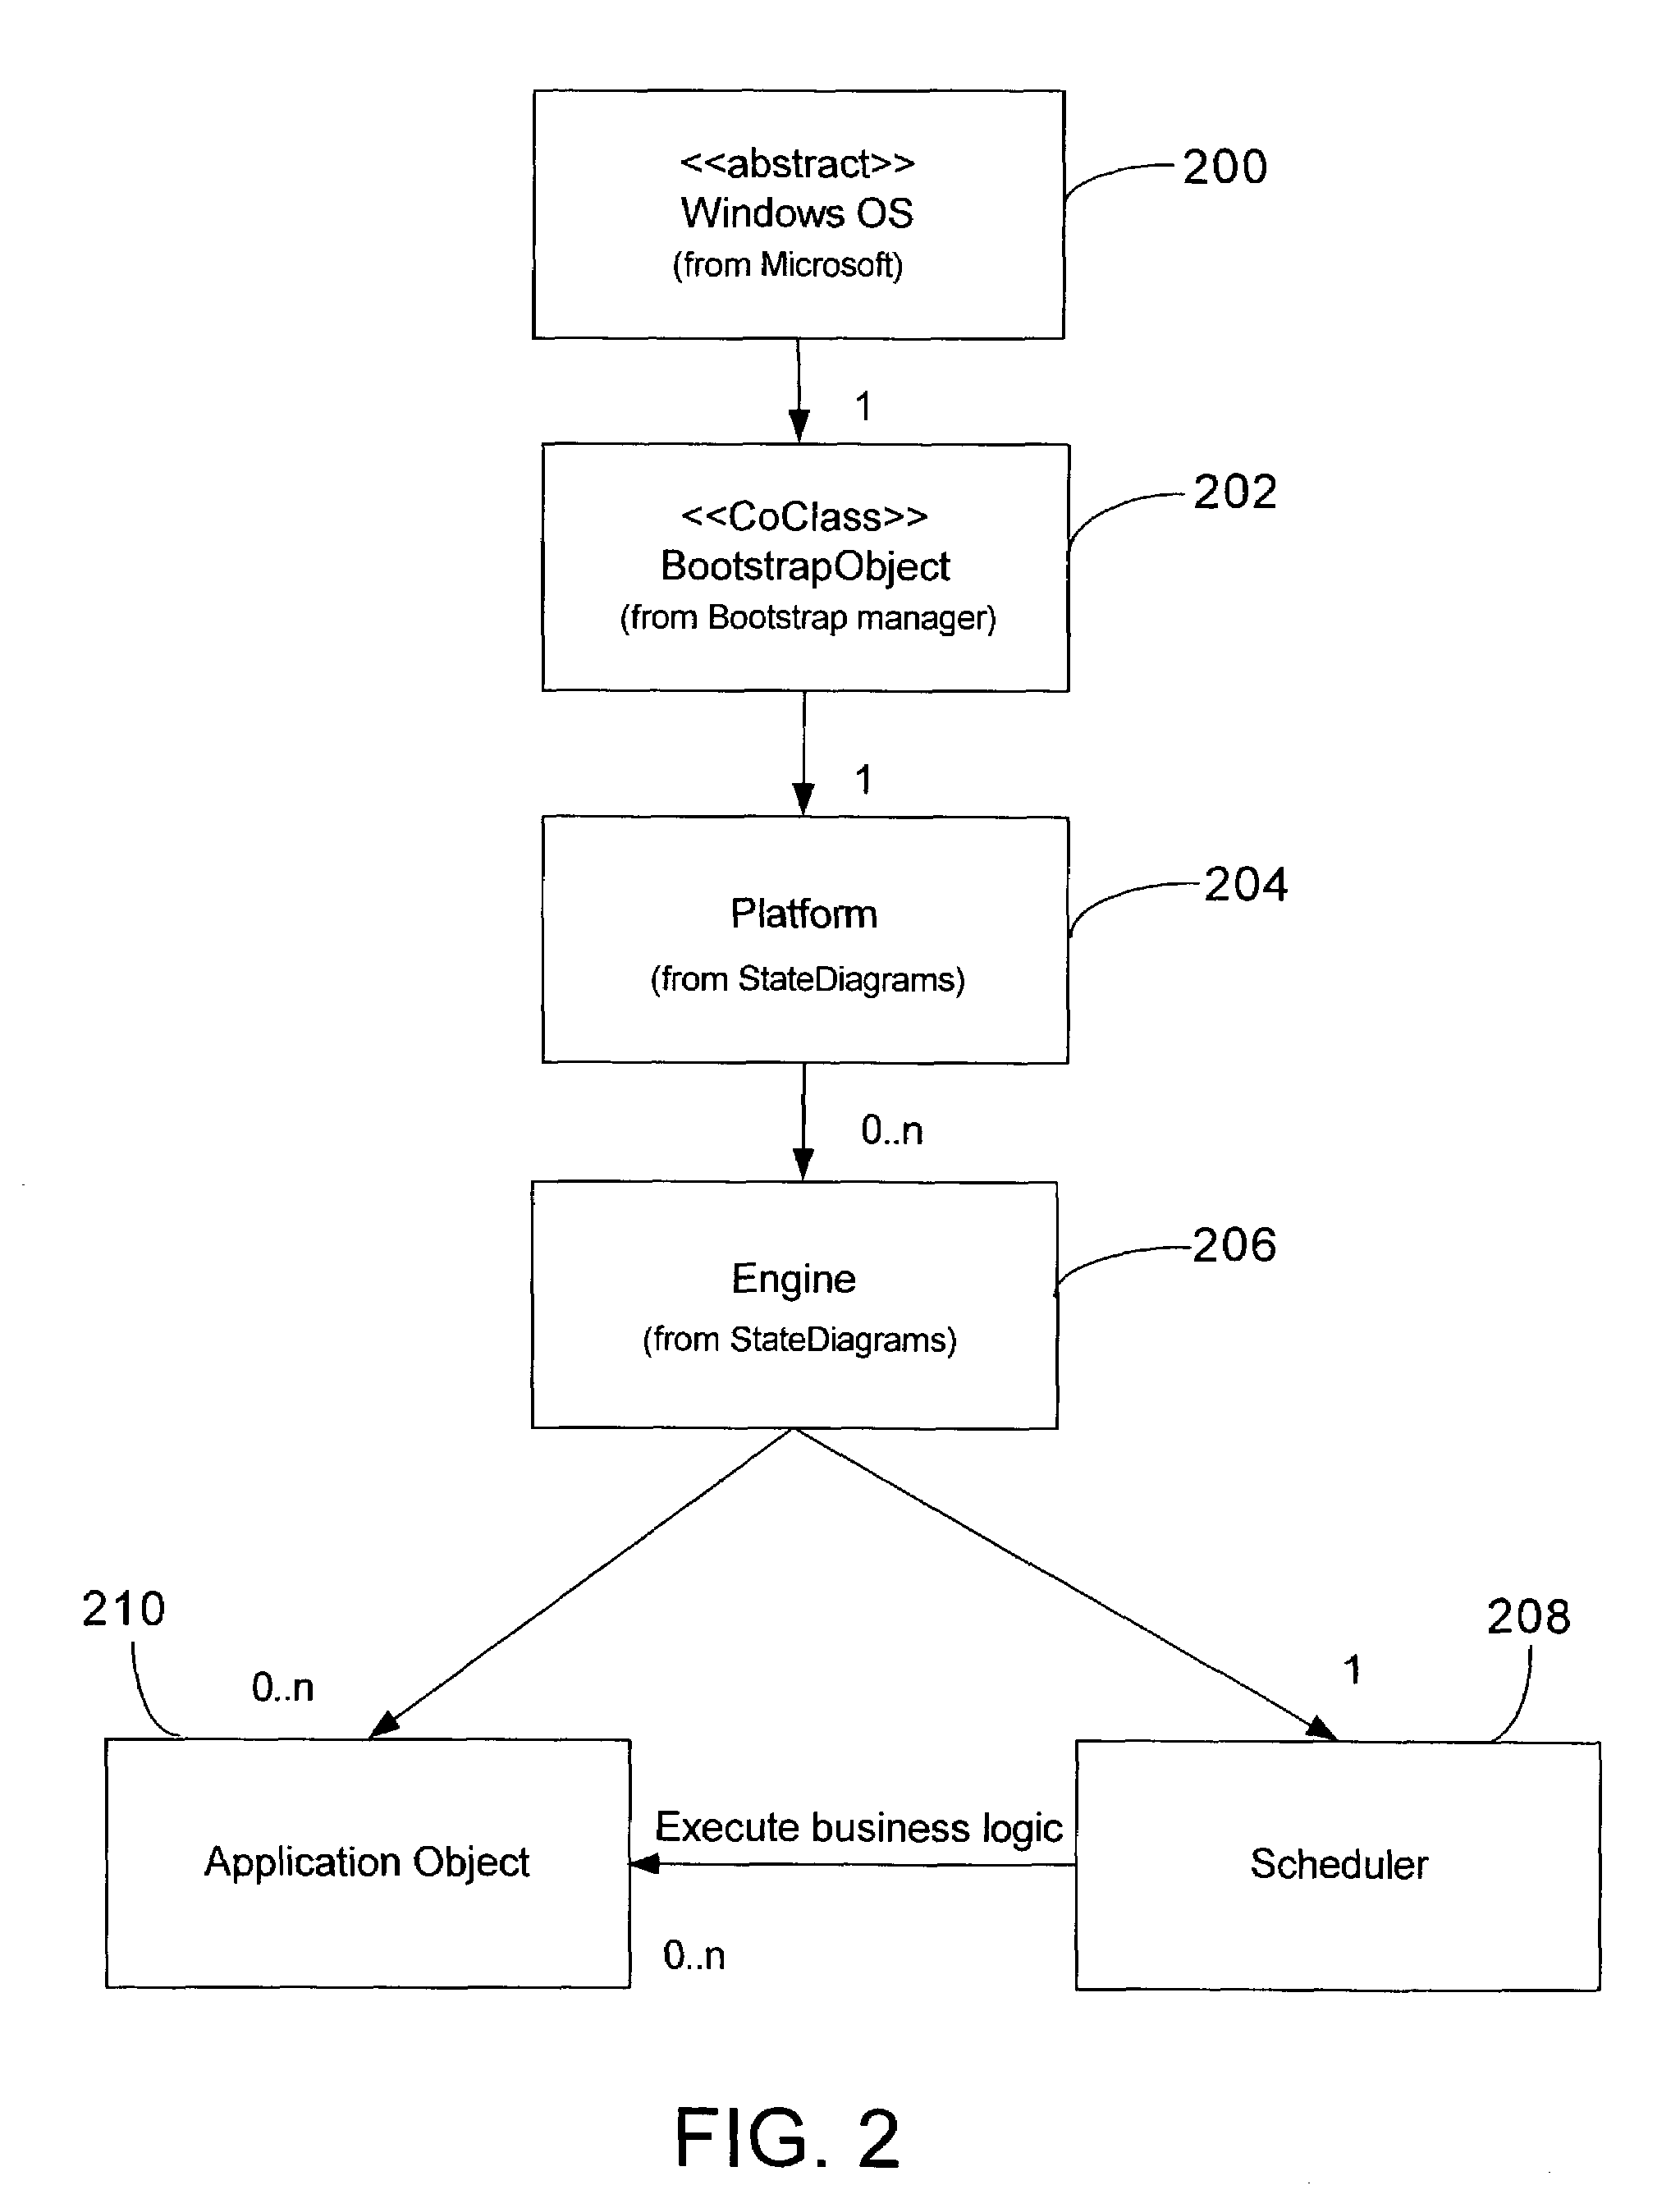 Supervisory process control and manufacturing information system application having an extensible component model